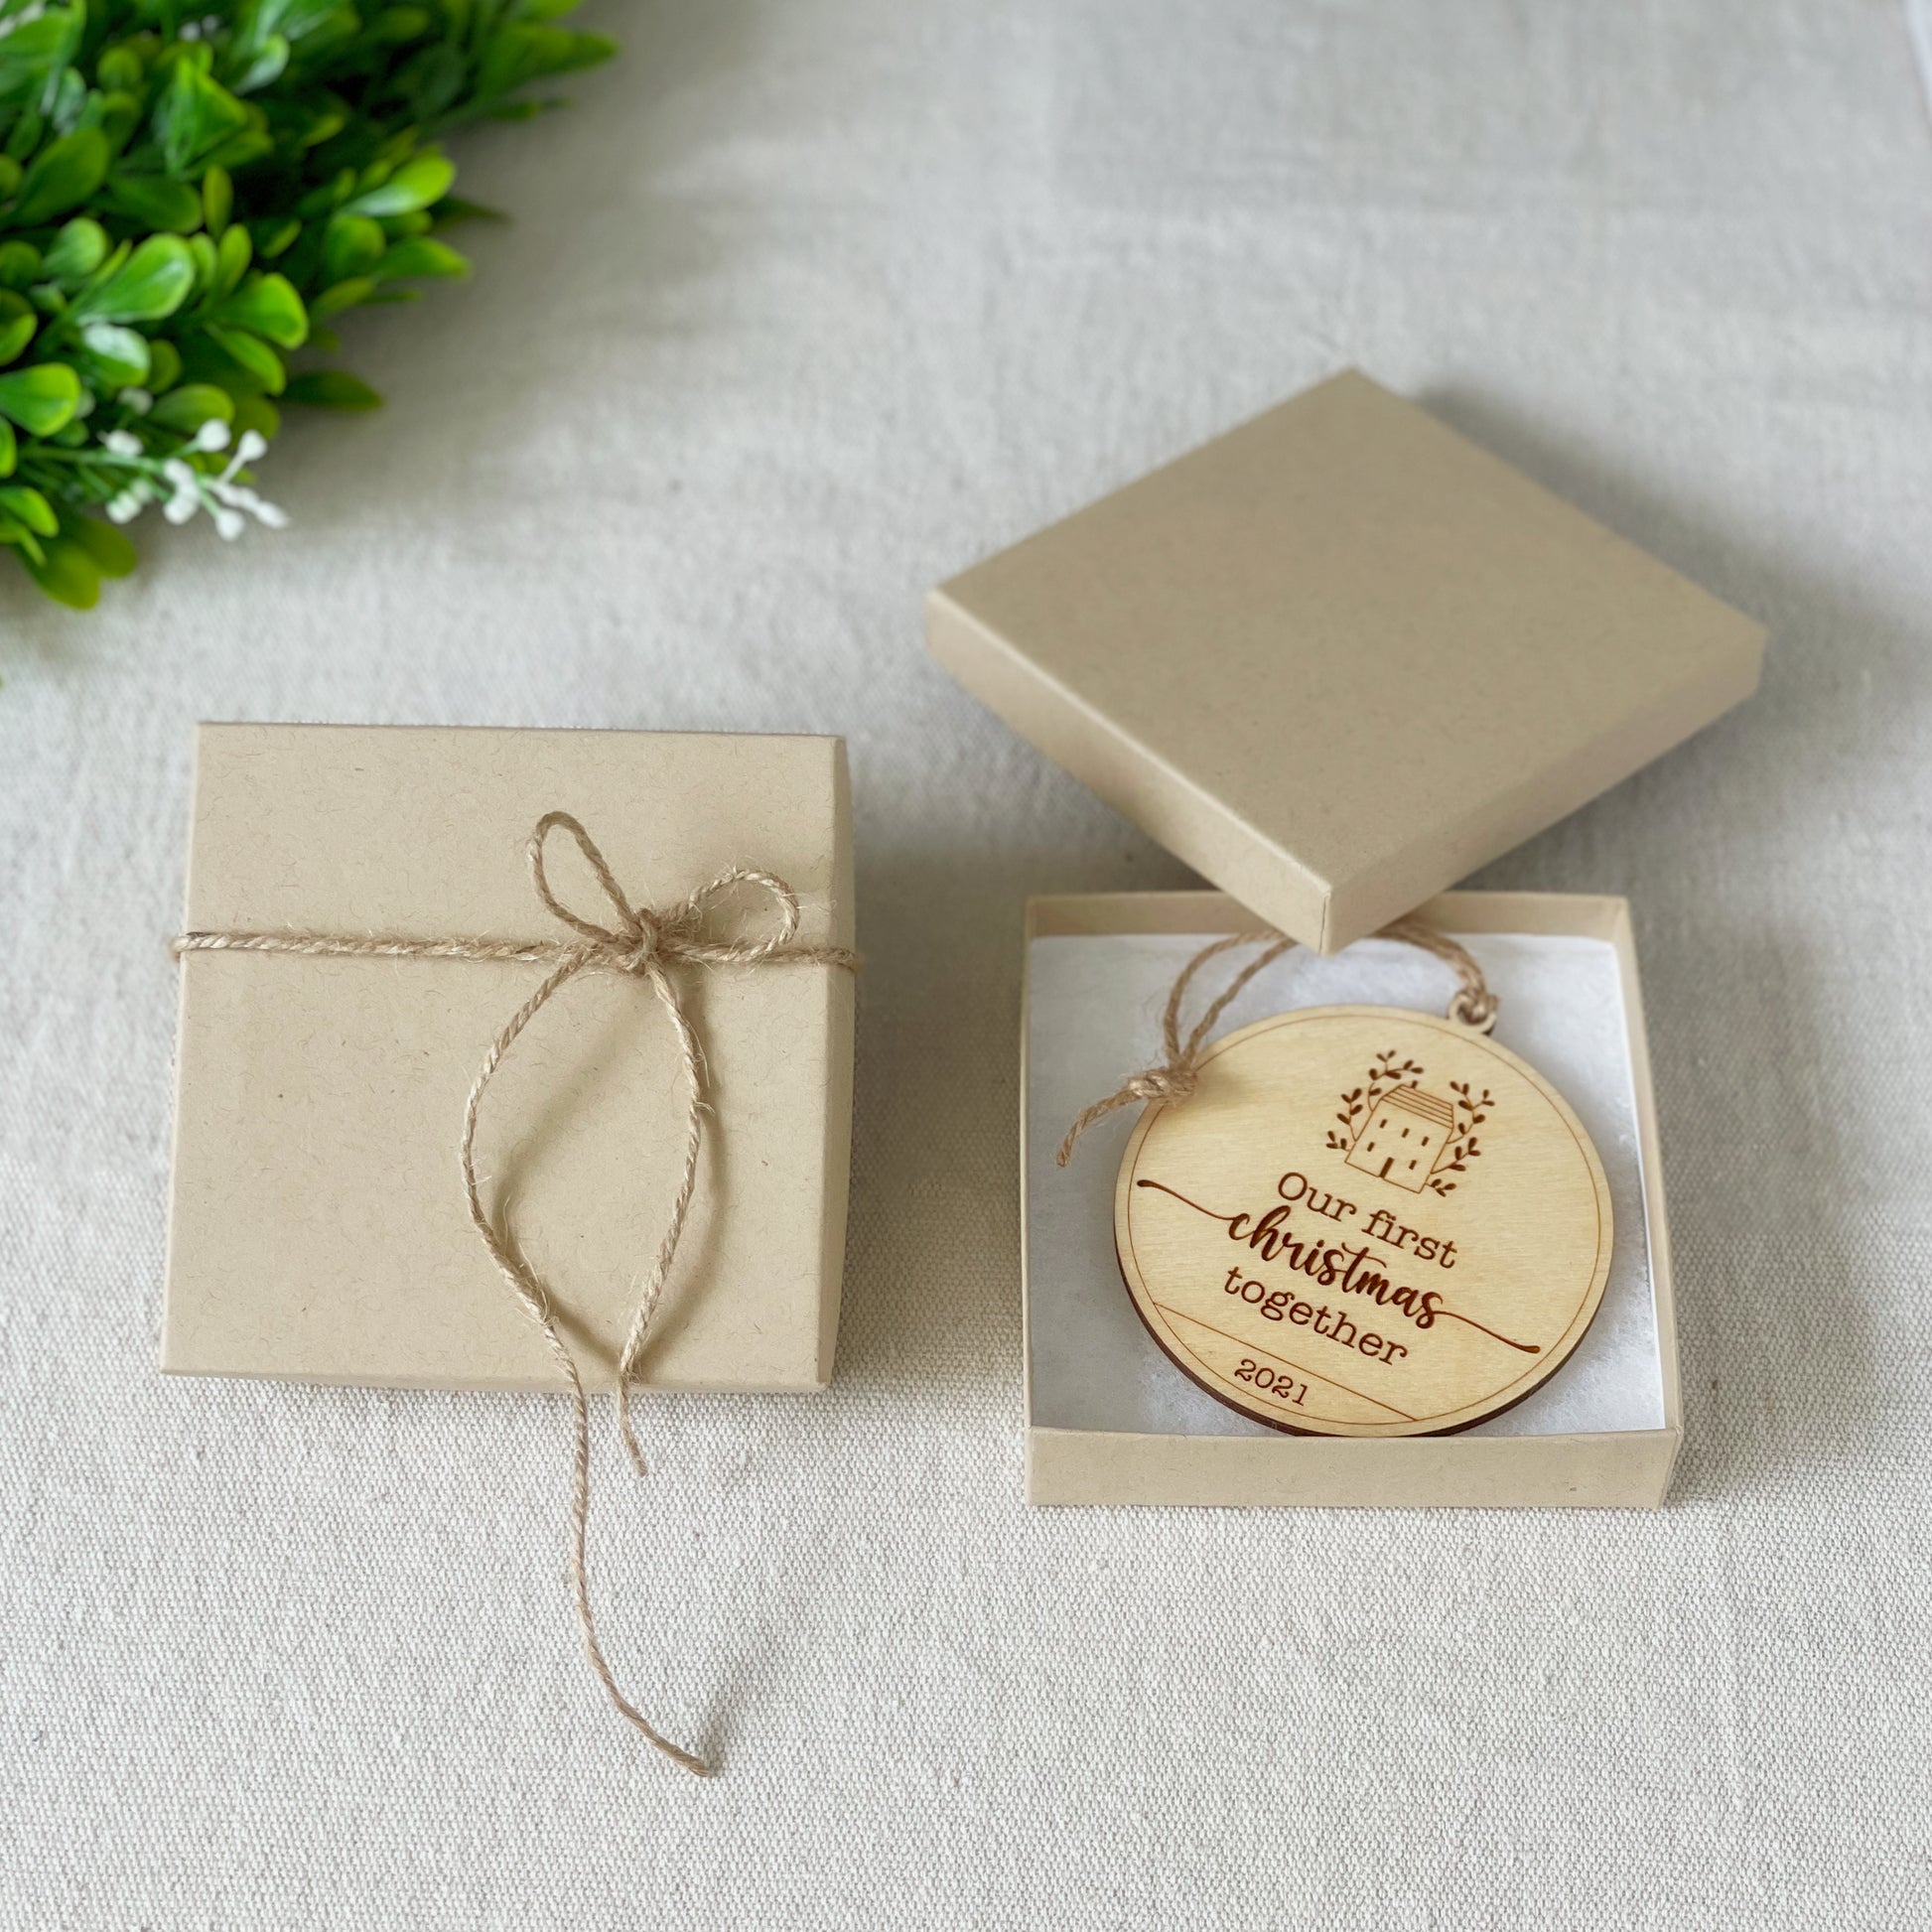 Gift box for earrings and engraved ornaments